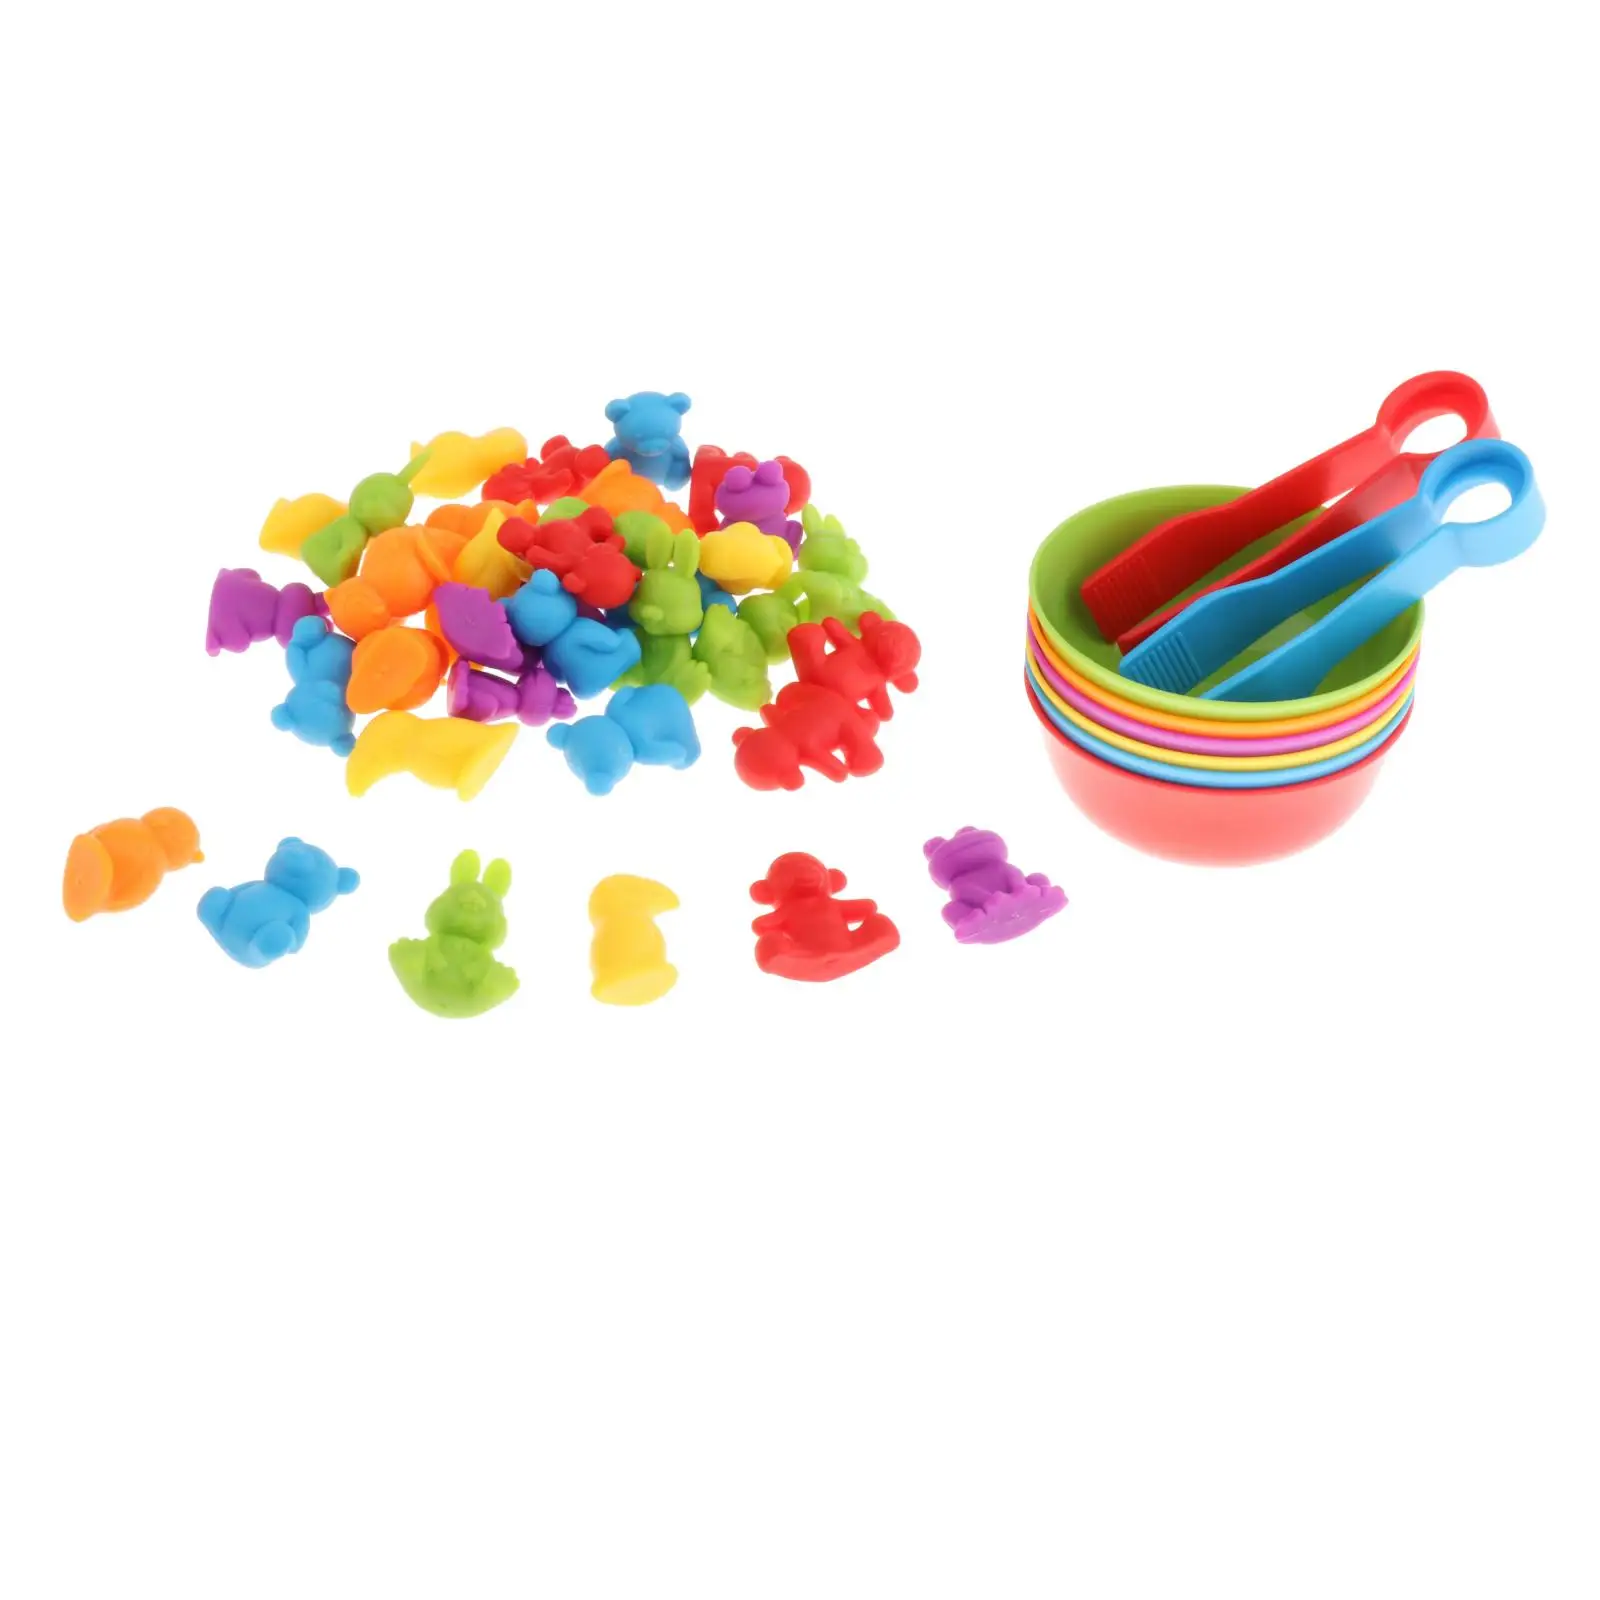 Colorful Sorting Toys with Bowls Learning Toys Math Learning for Child Girls